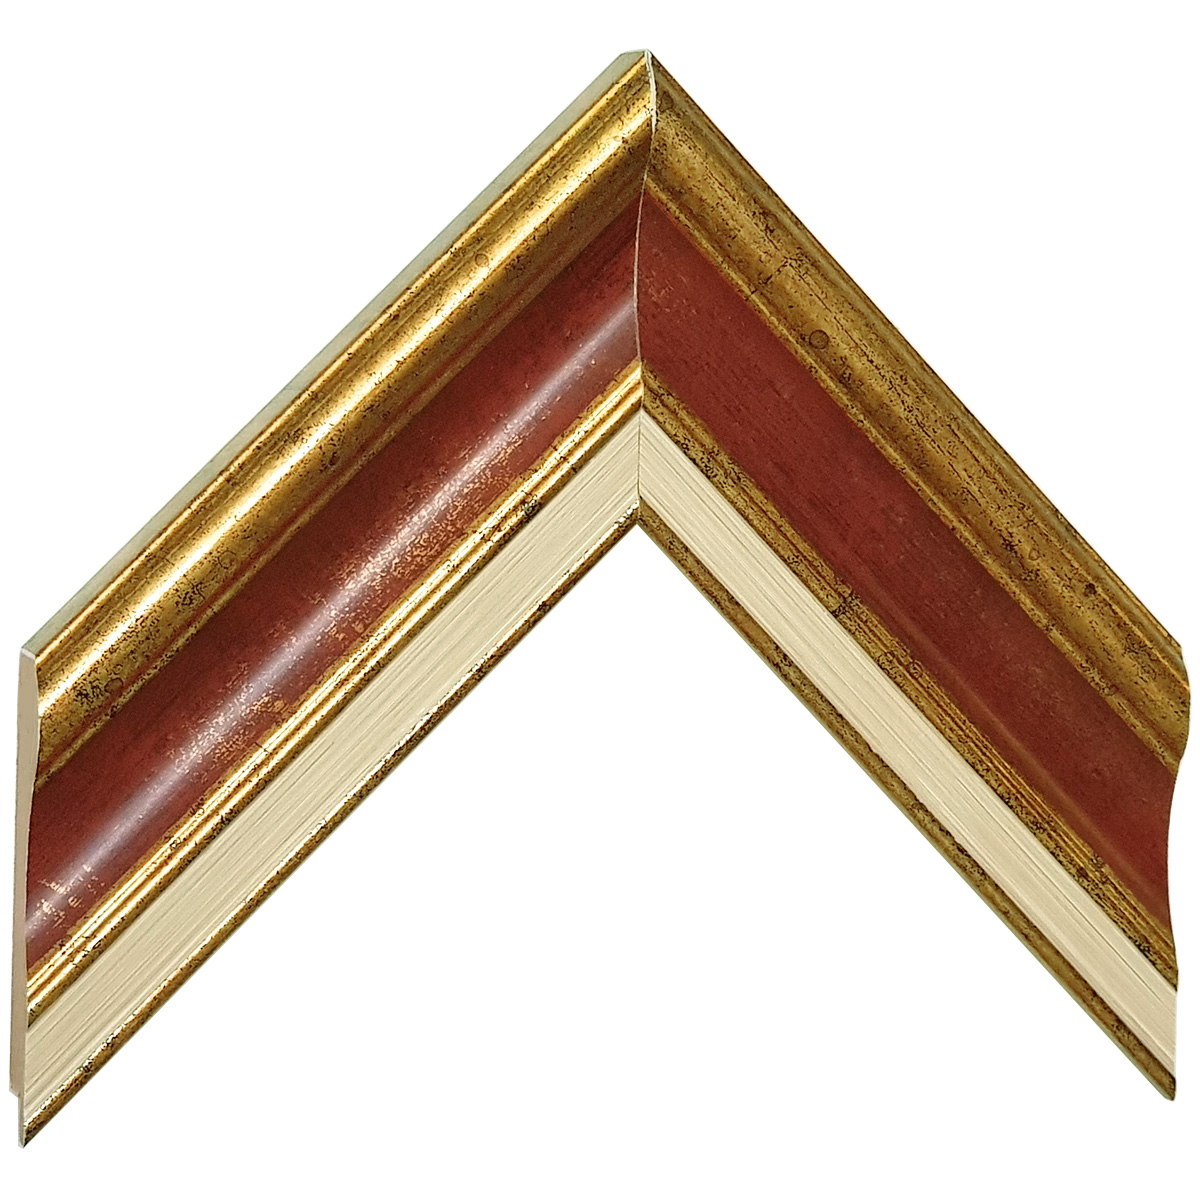 Moulding finger-jointed pine - width 61mm height 20 - Gold, red band - Sample